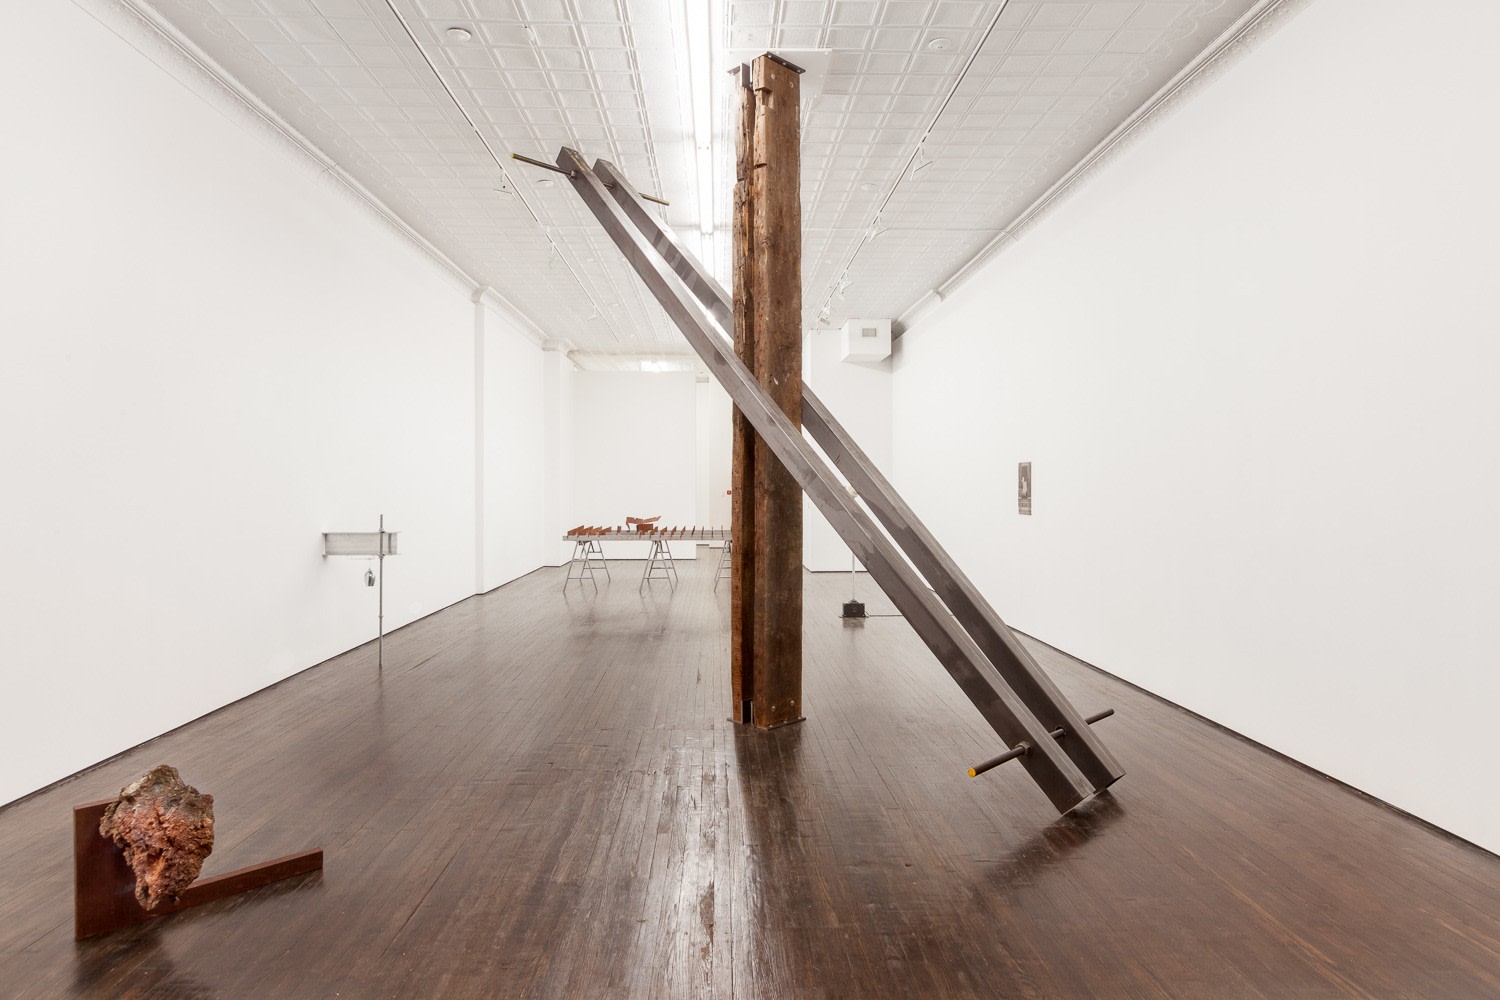 wooden and metal piling sculpture in gallery